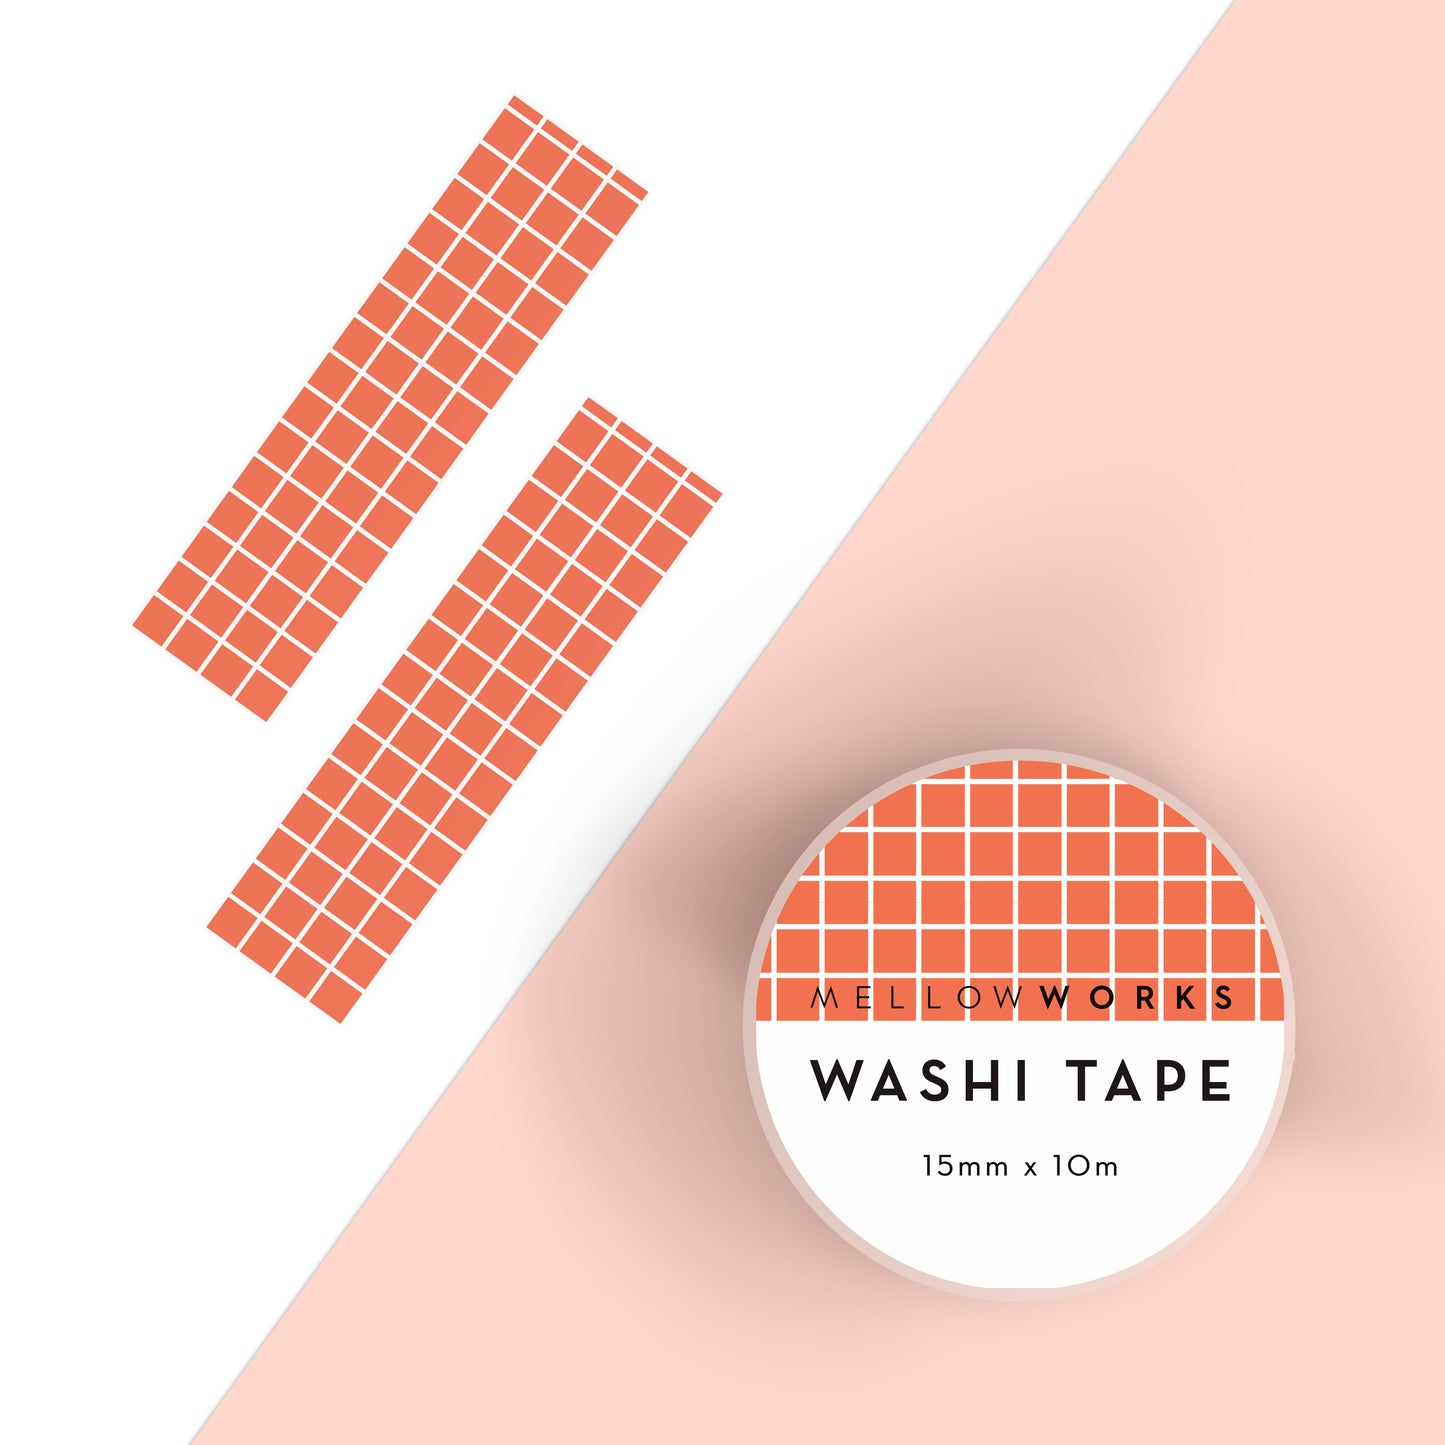 GRID WASHI TAPE IN RED